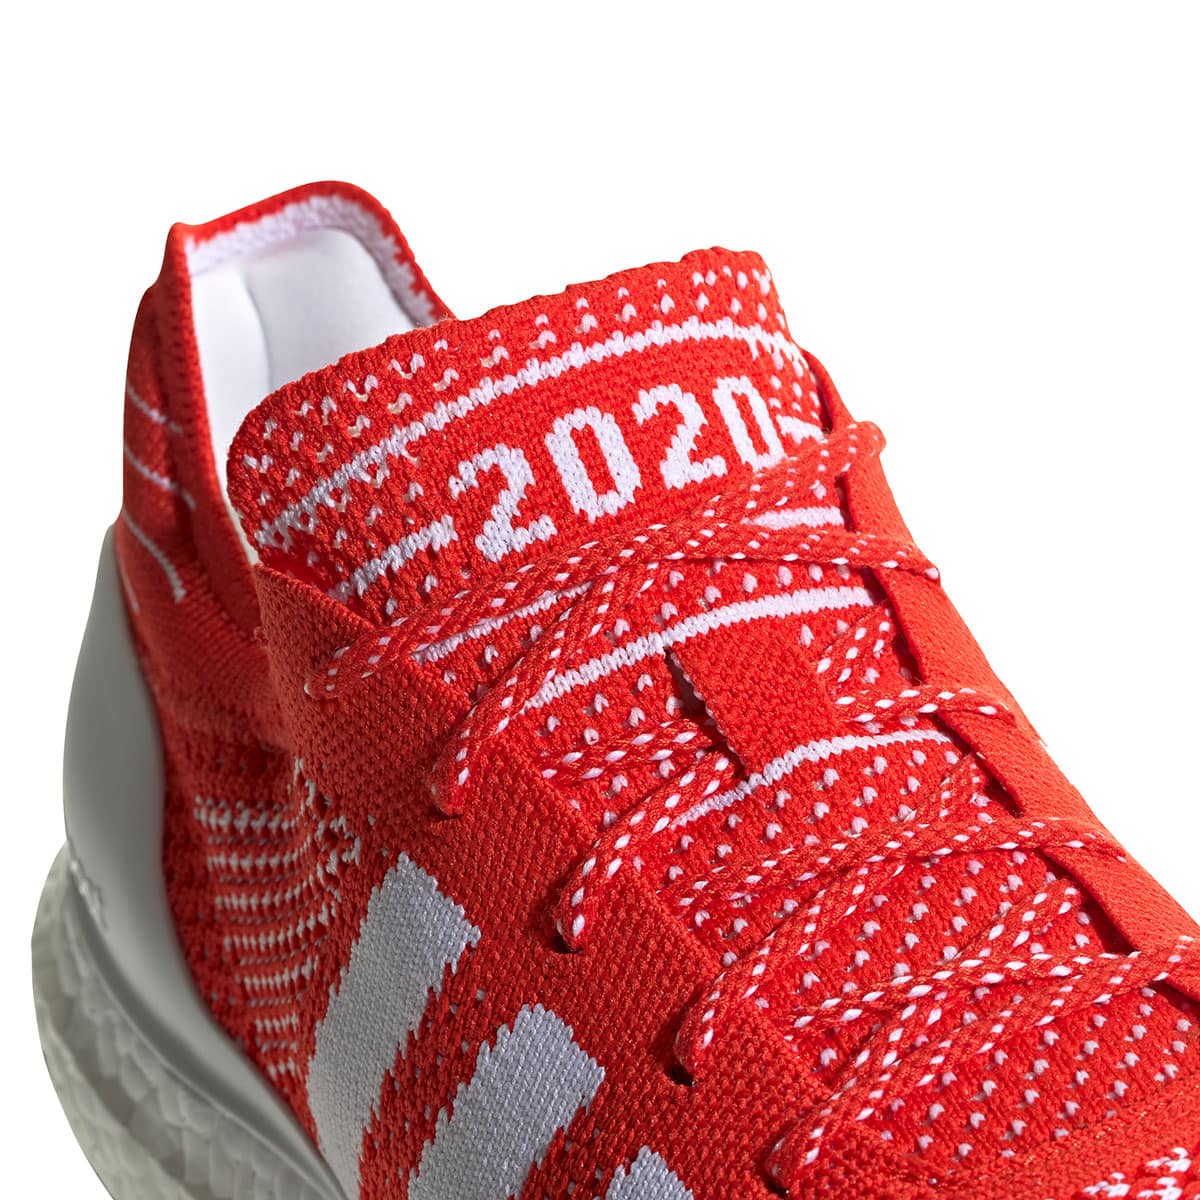 adidas ULTRABOOST DNA PRIME ACTIVE RED/FOOTWEAR WHITE/CORE BLACK ...